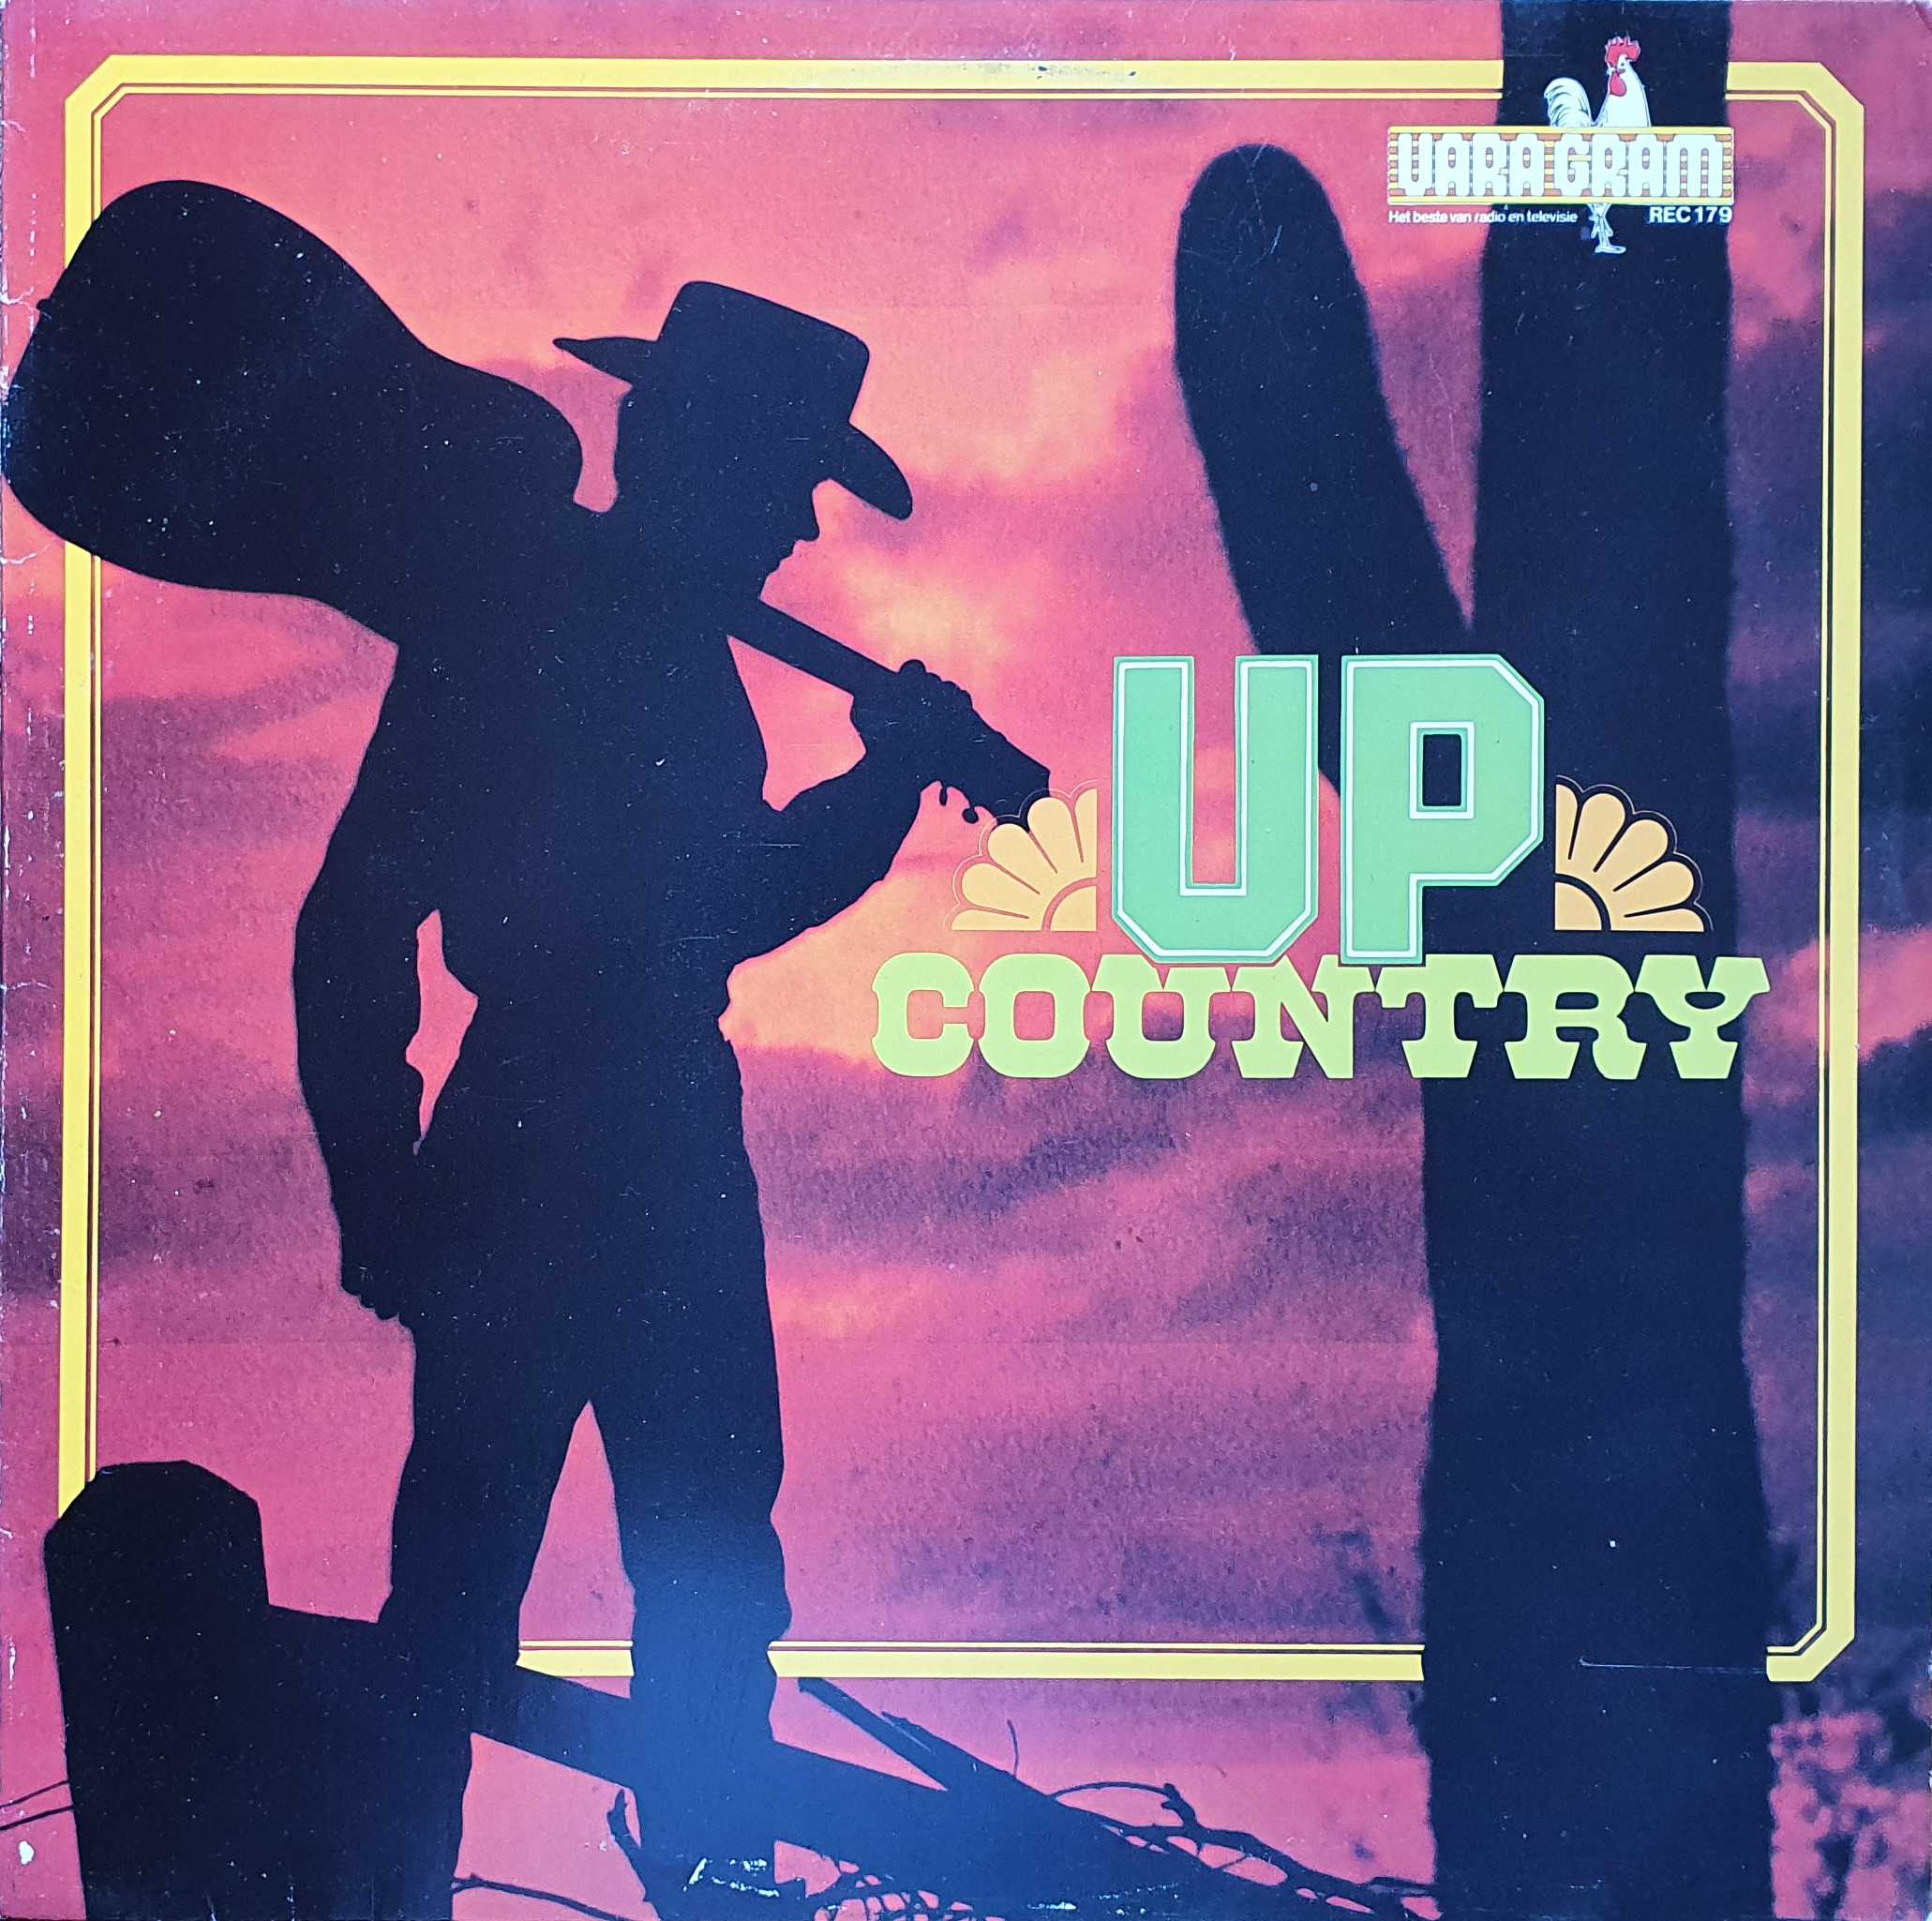 Picture of Up country by artist Various from the BBC albums - Records and Tapes library